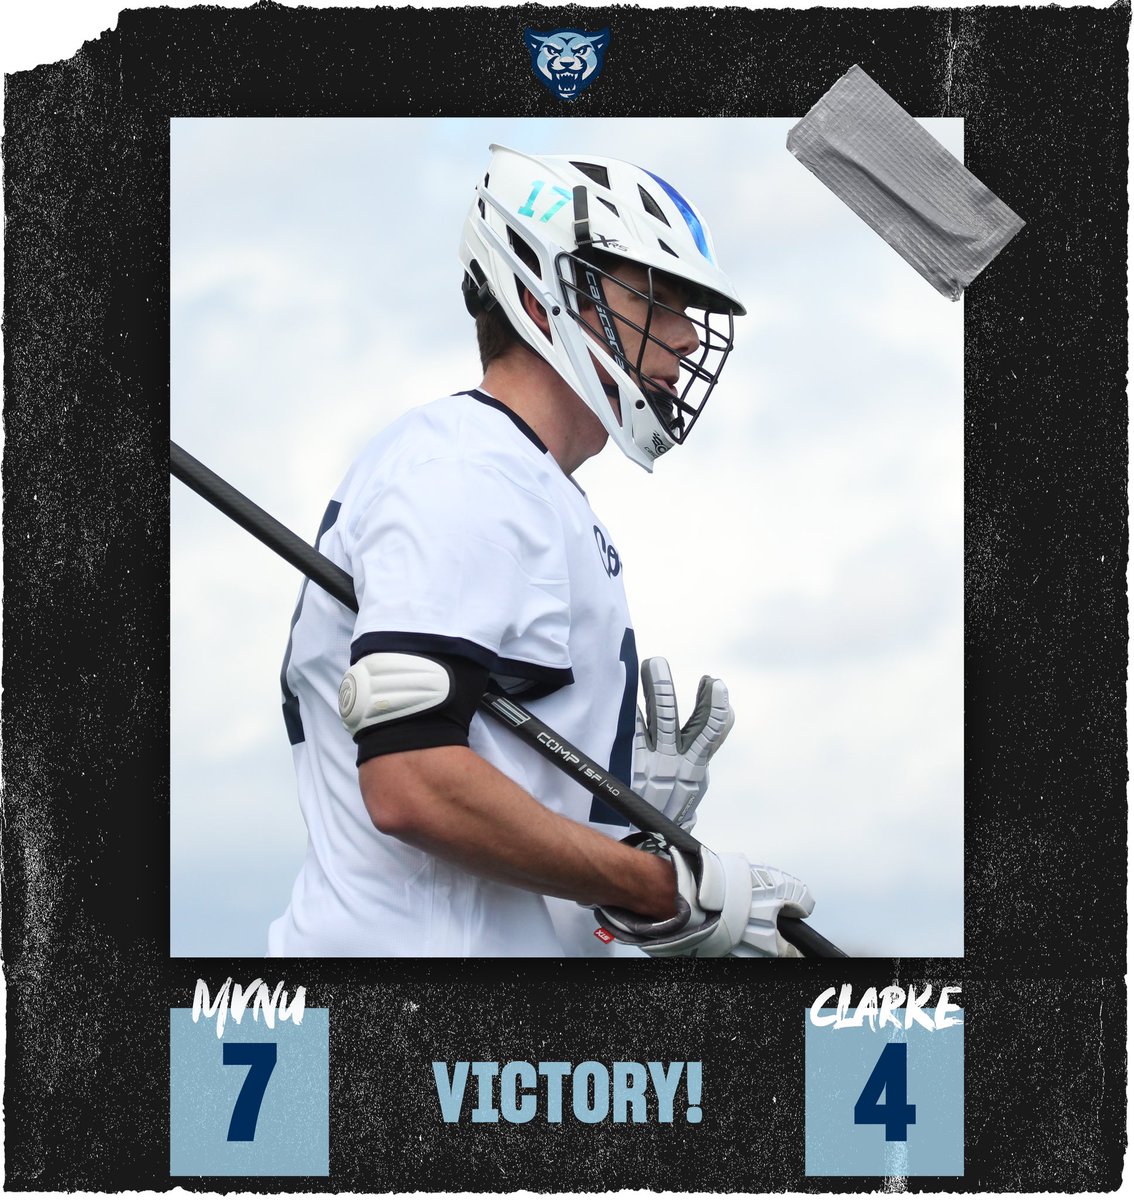 .@MVNUlax opens conference play with a 7-4 win over Clarke University in Chicago!